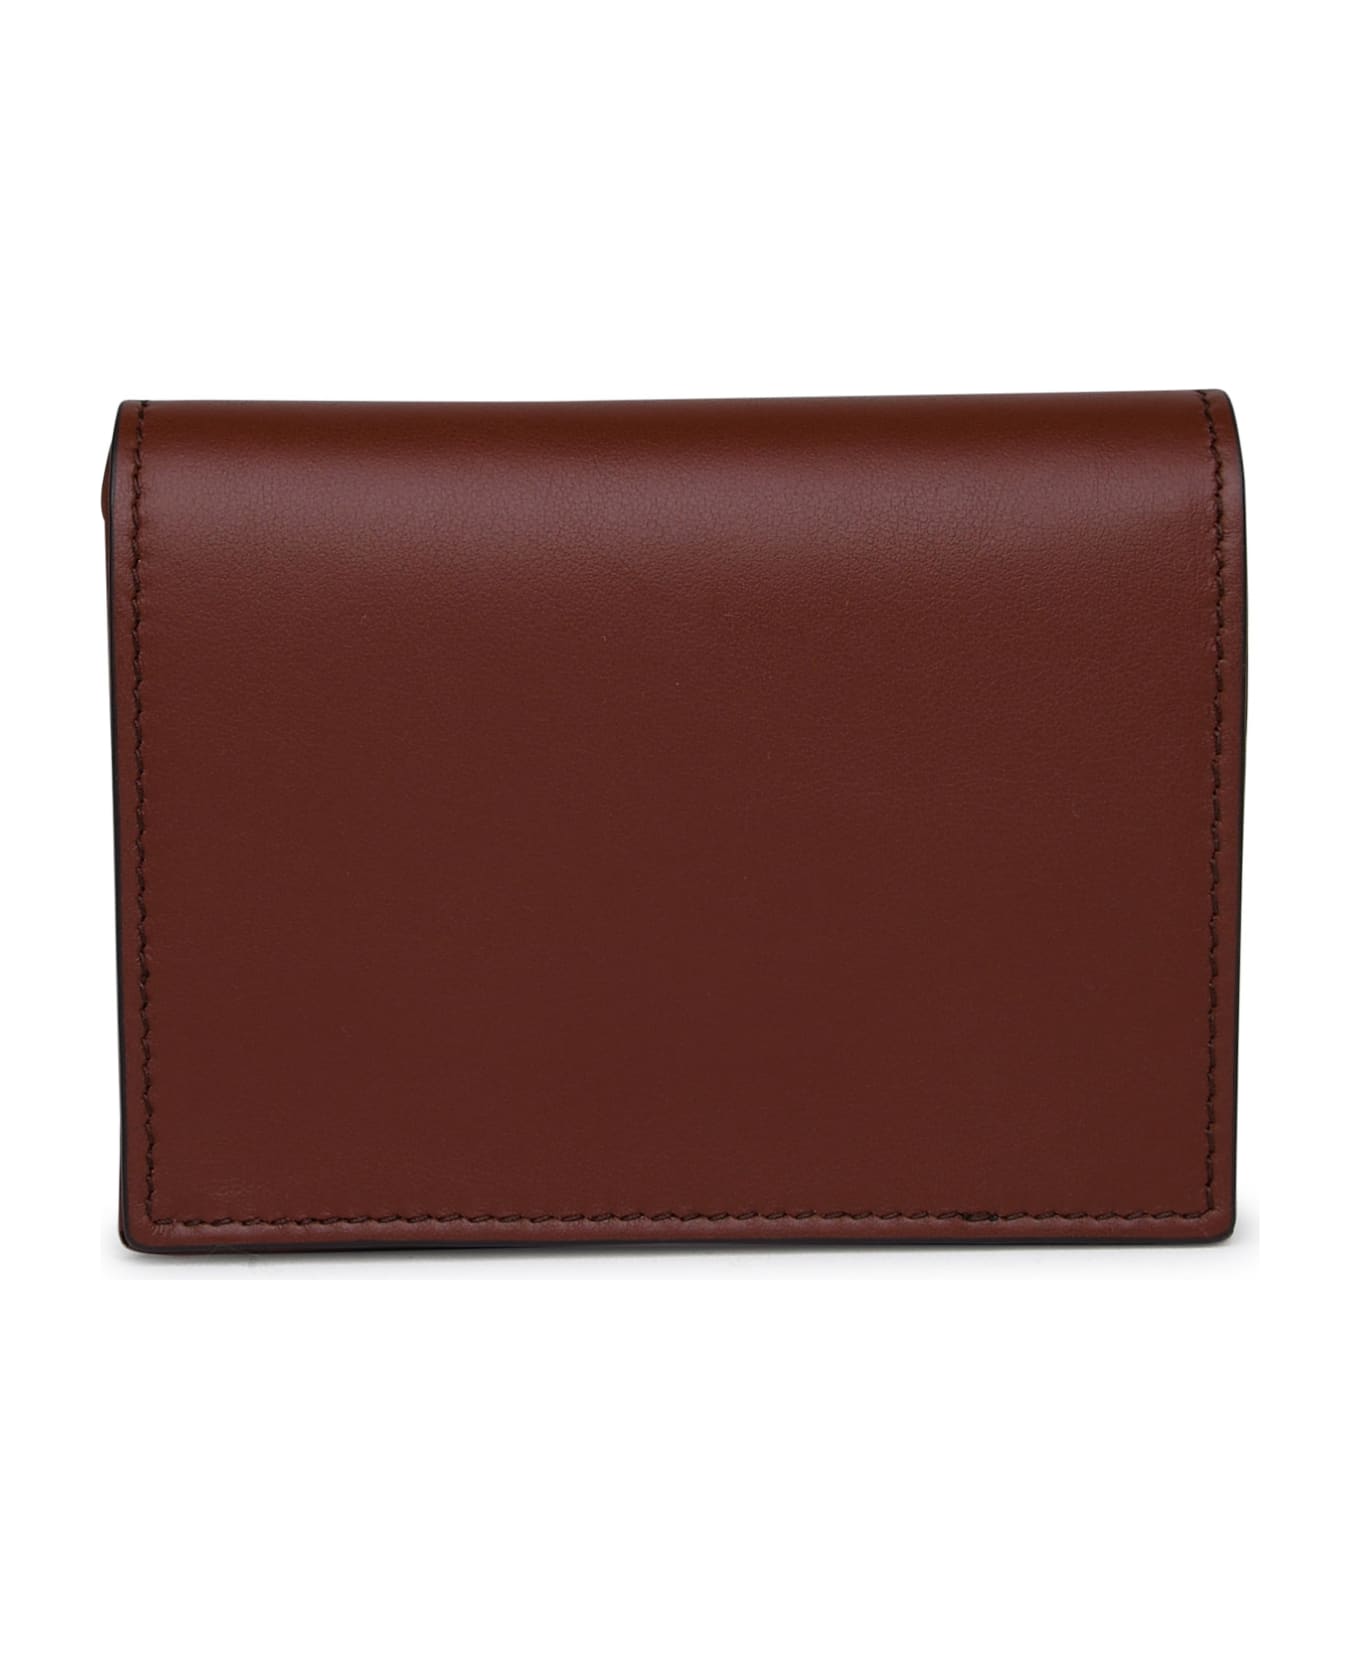 Etro Brown Leather Wallet - Brown